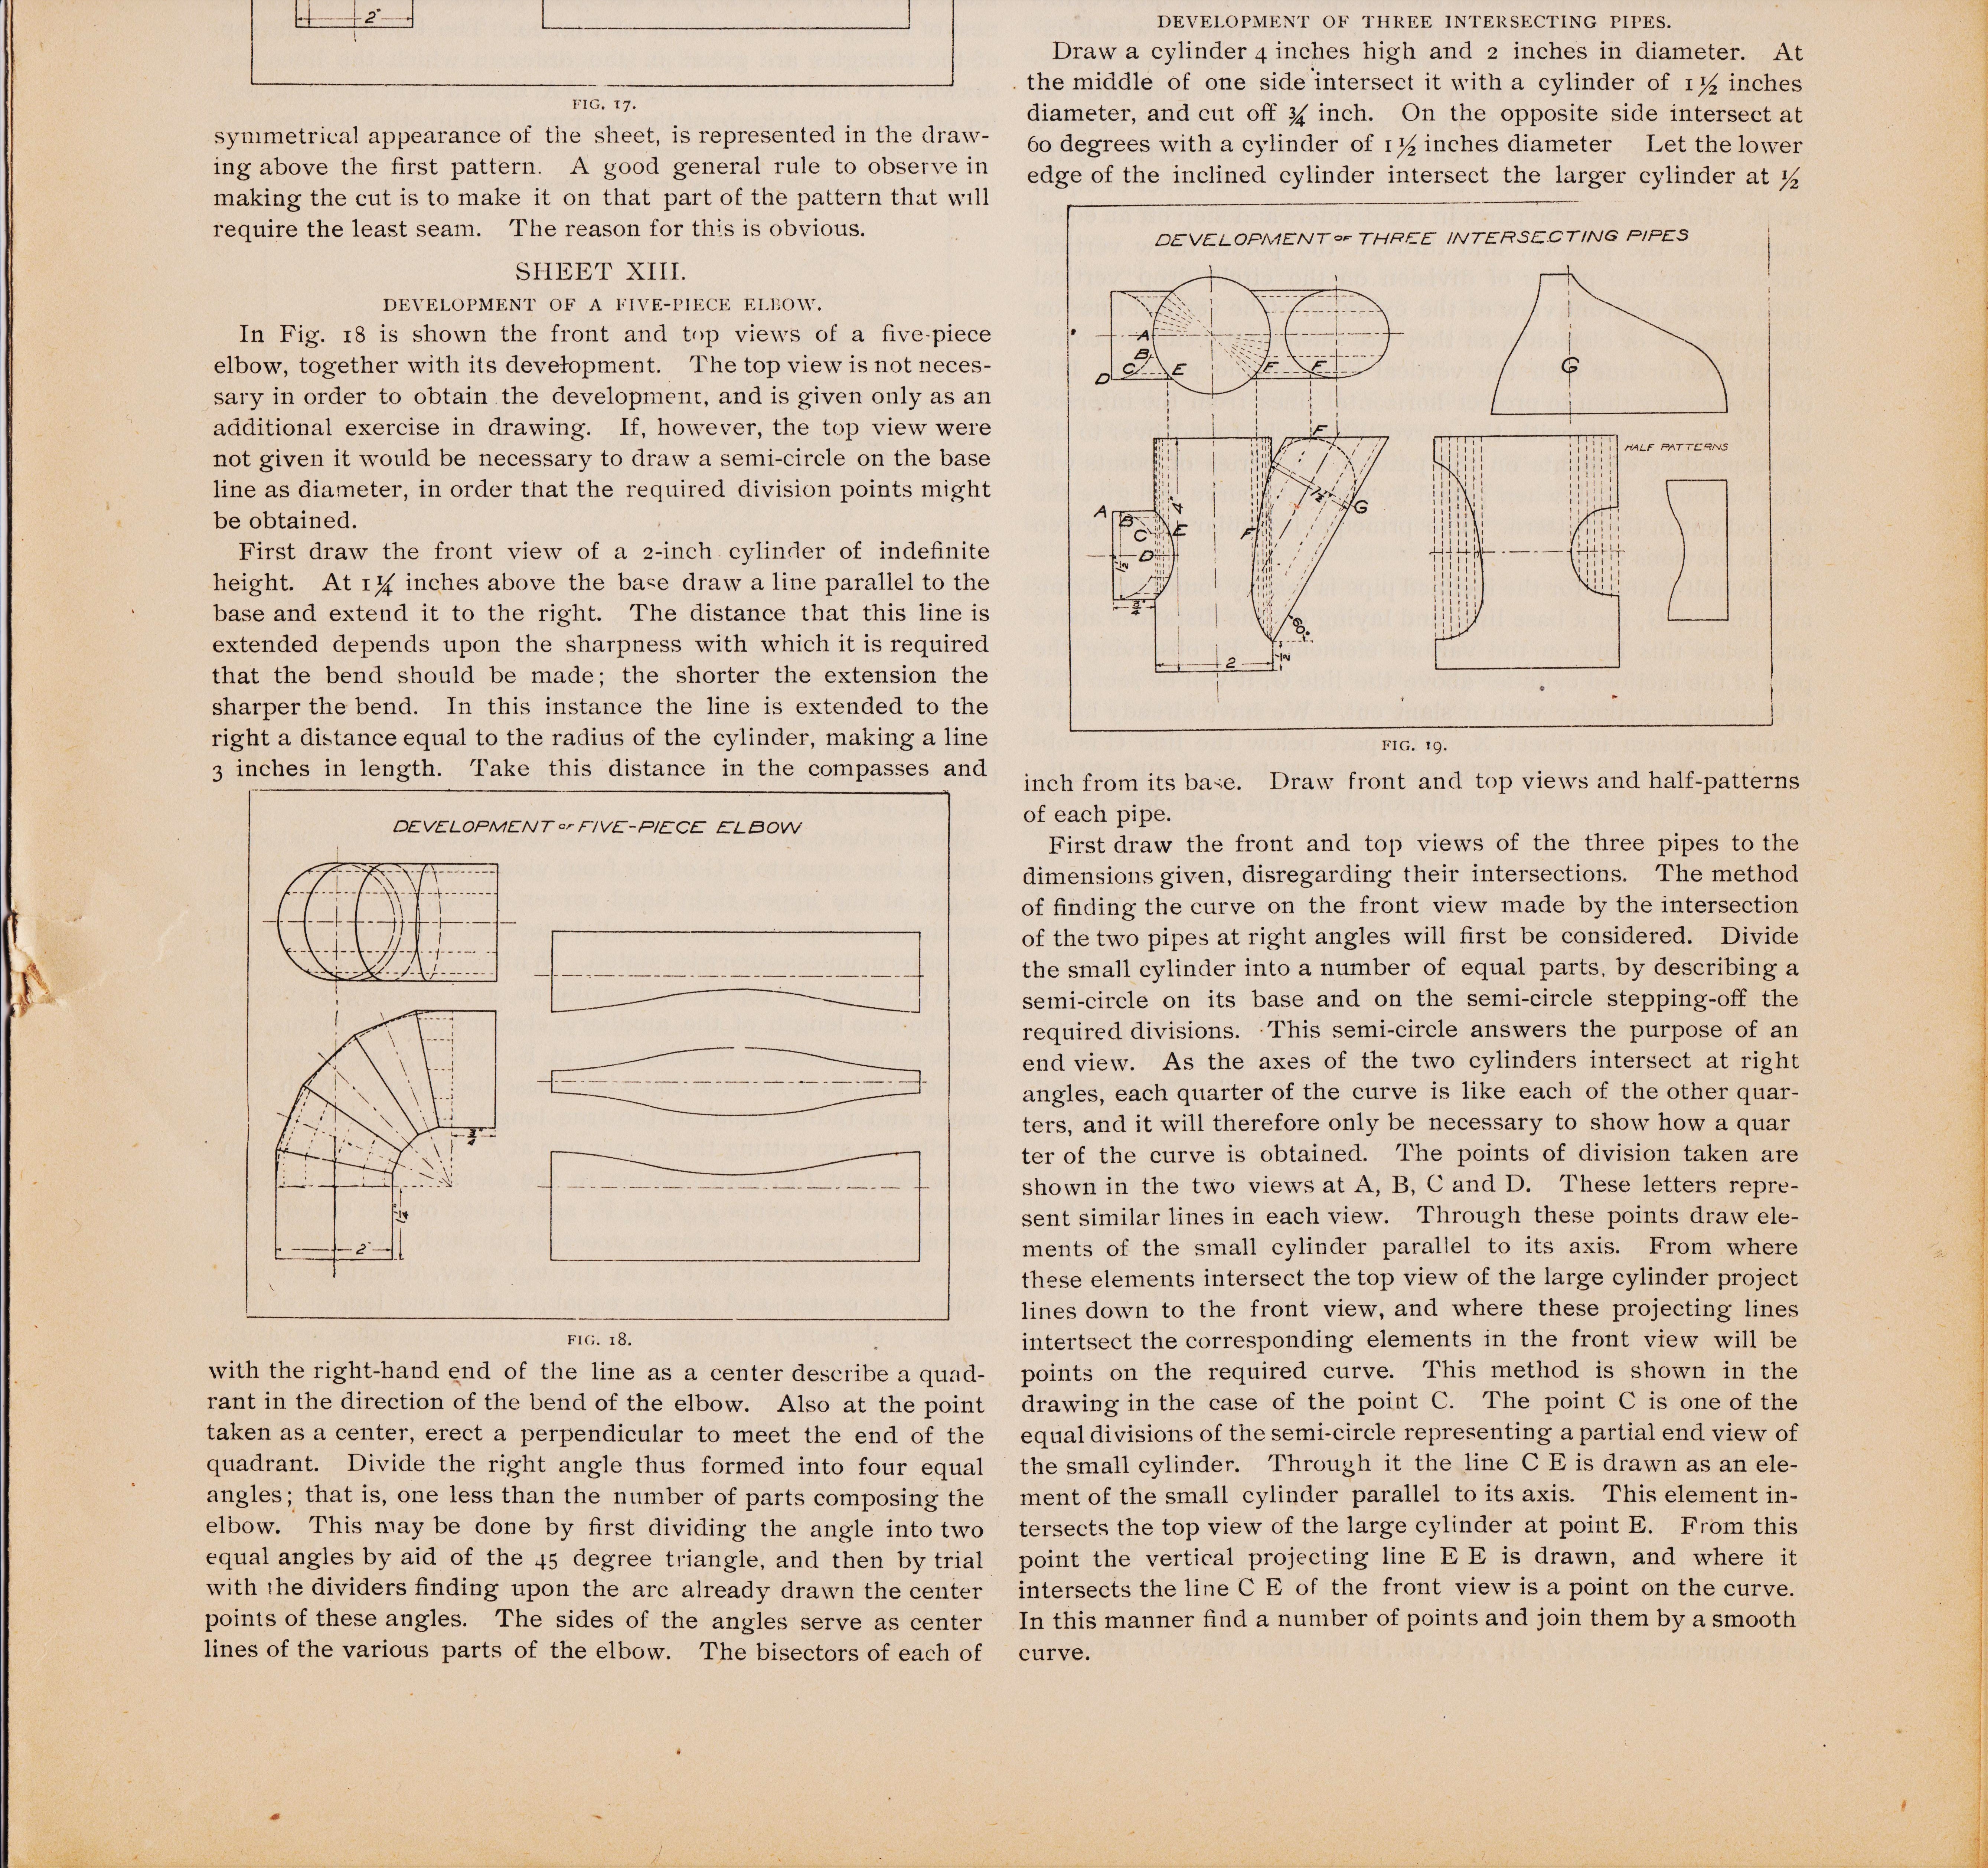 http://antiquemachinery.com/images-2020/Machinery-Magazine-March-1896-vol-2-no-7-page-201-top-Helical-Gearing-single-double-design.jpg